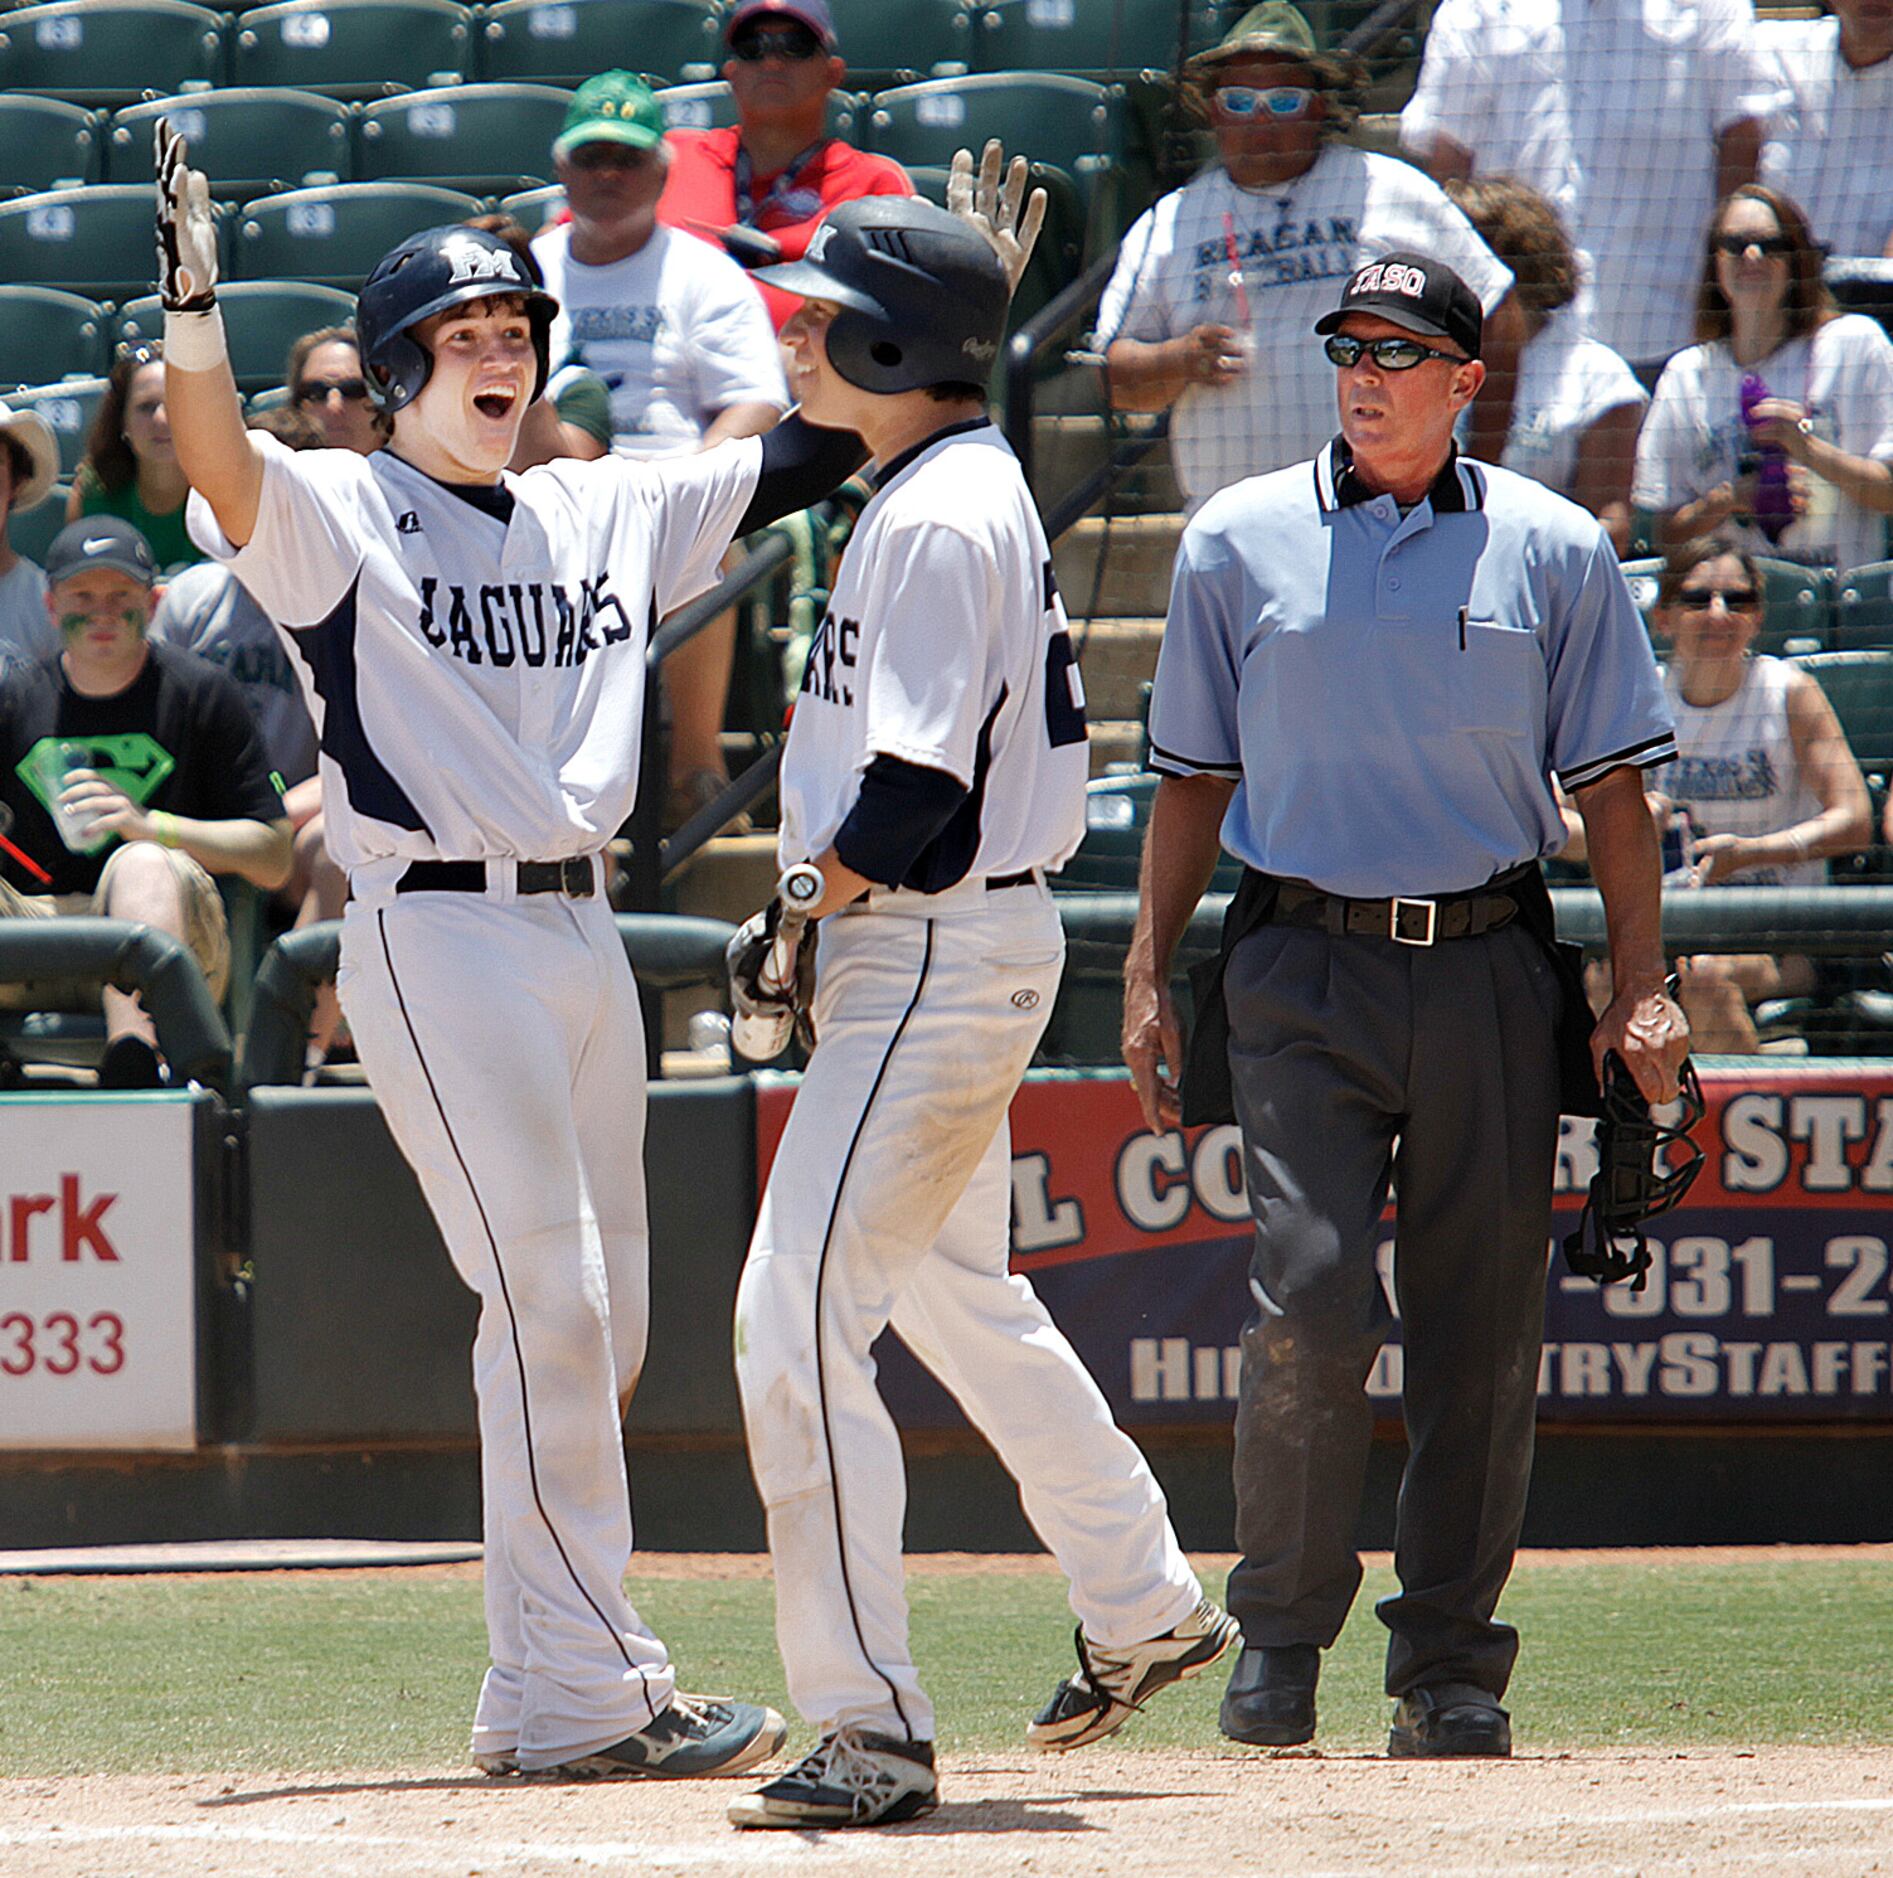 After running in the final run making it 10-0, Flower Mound player Mitch Andrews (5, left)...